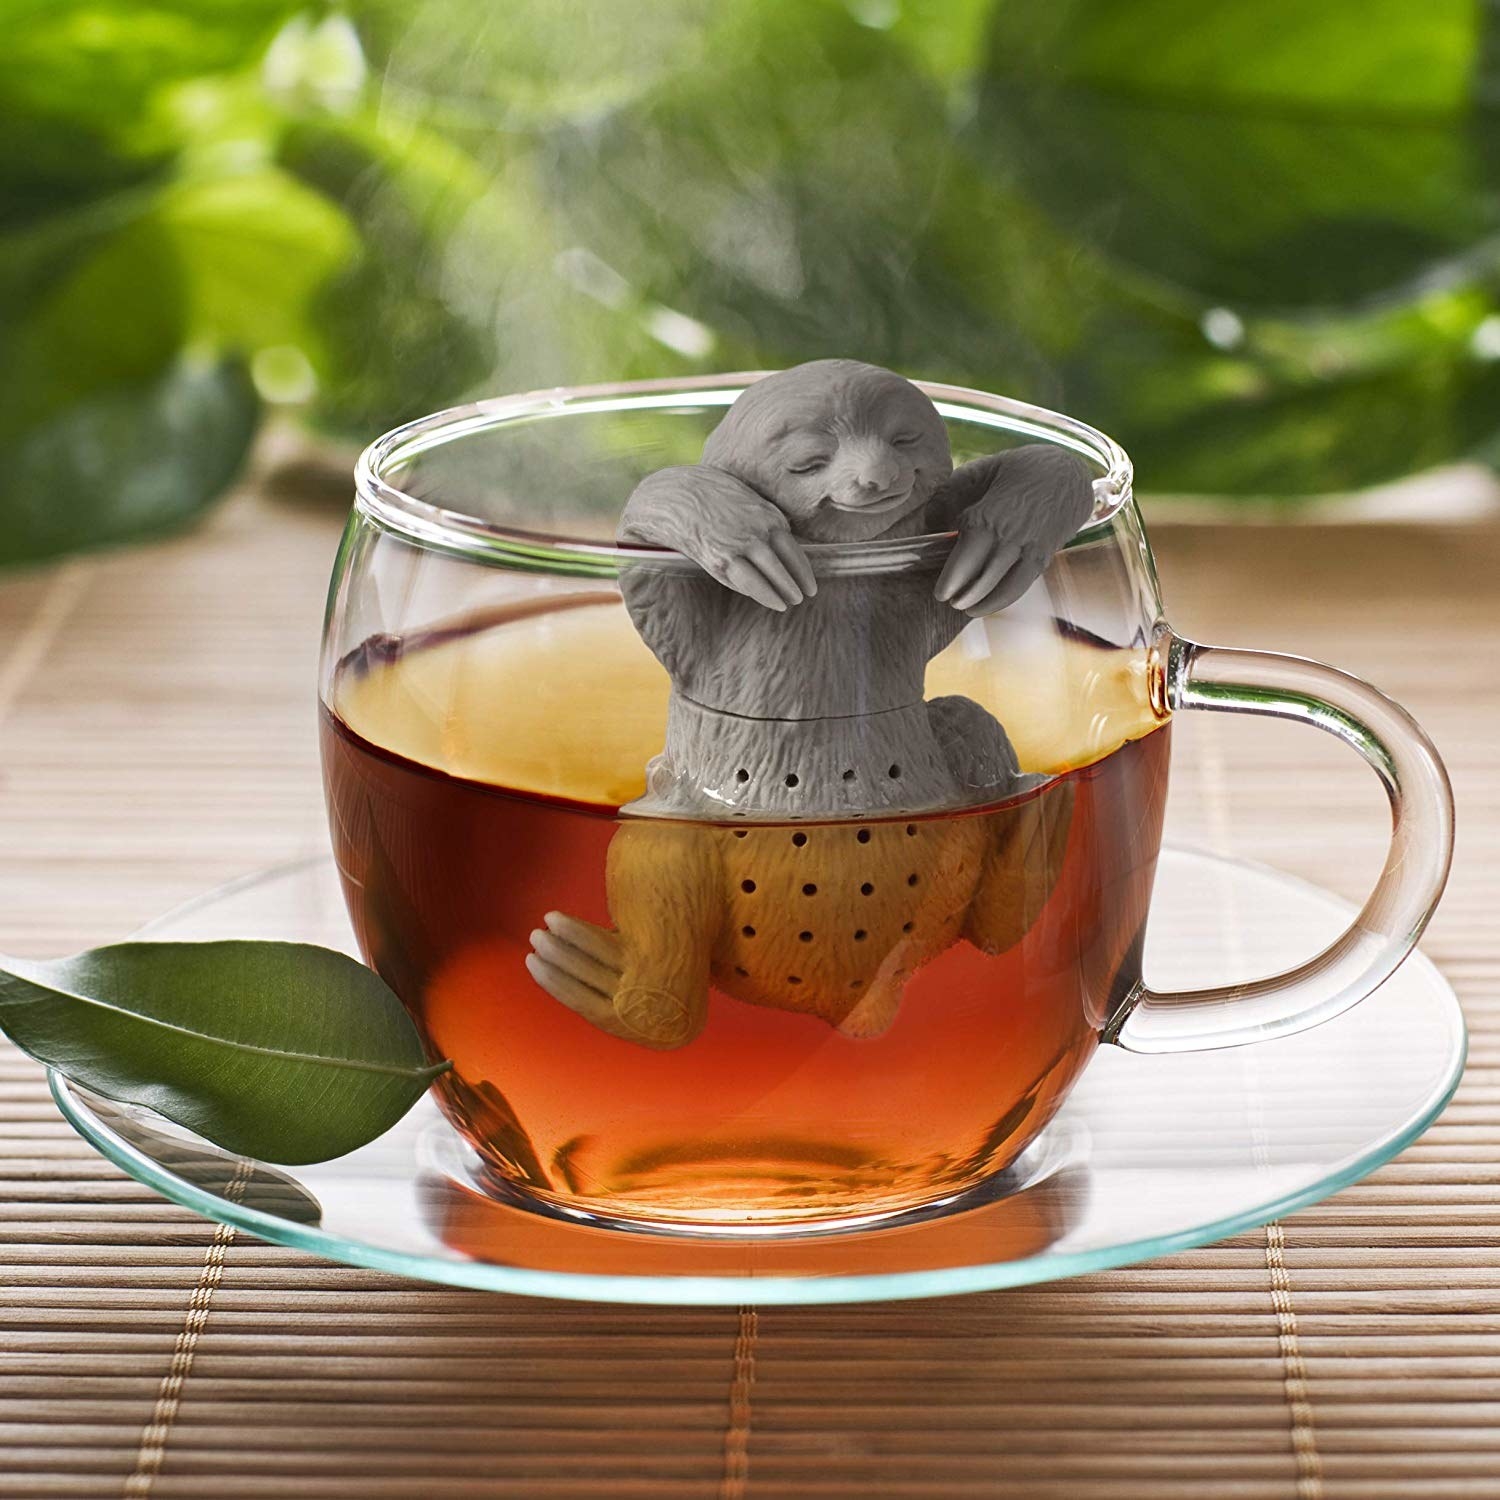 A clear glass saucer is holding a clear glass mug. Inside of the mug, you can see tea and there is a gray sloth tea infuser that is hanging from the rim (with its &quot;paws&quot;) and into the water for the tea.